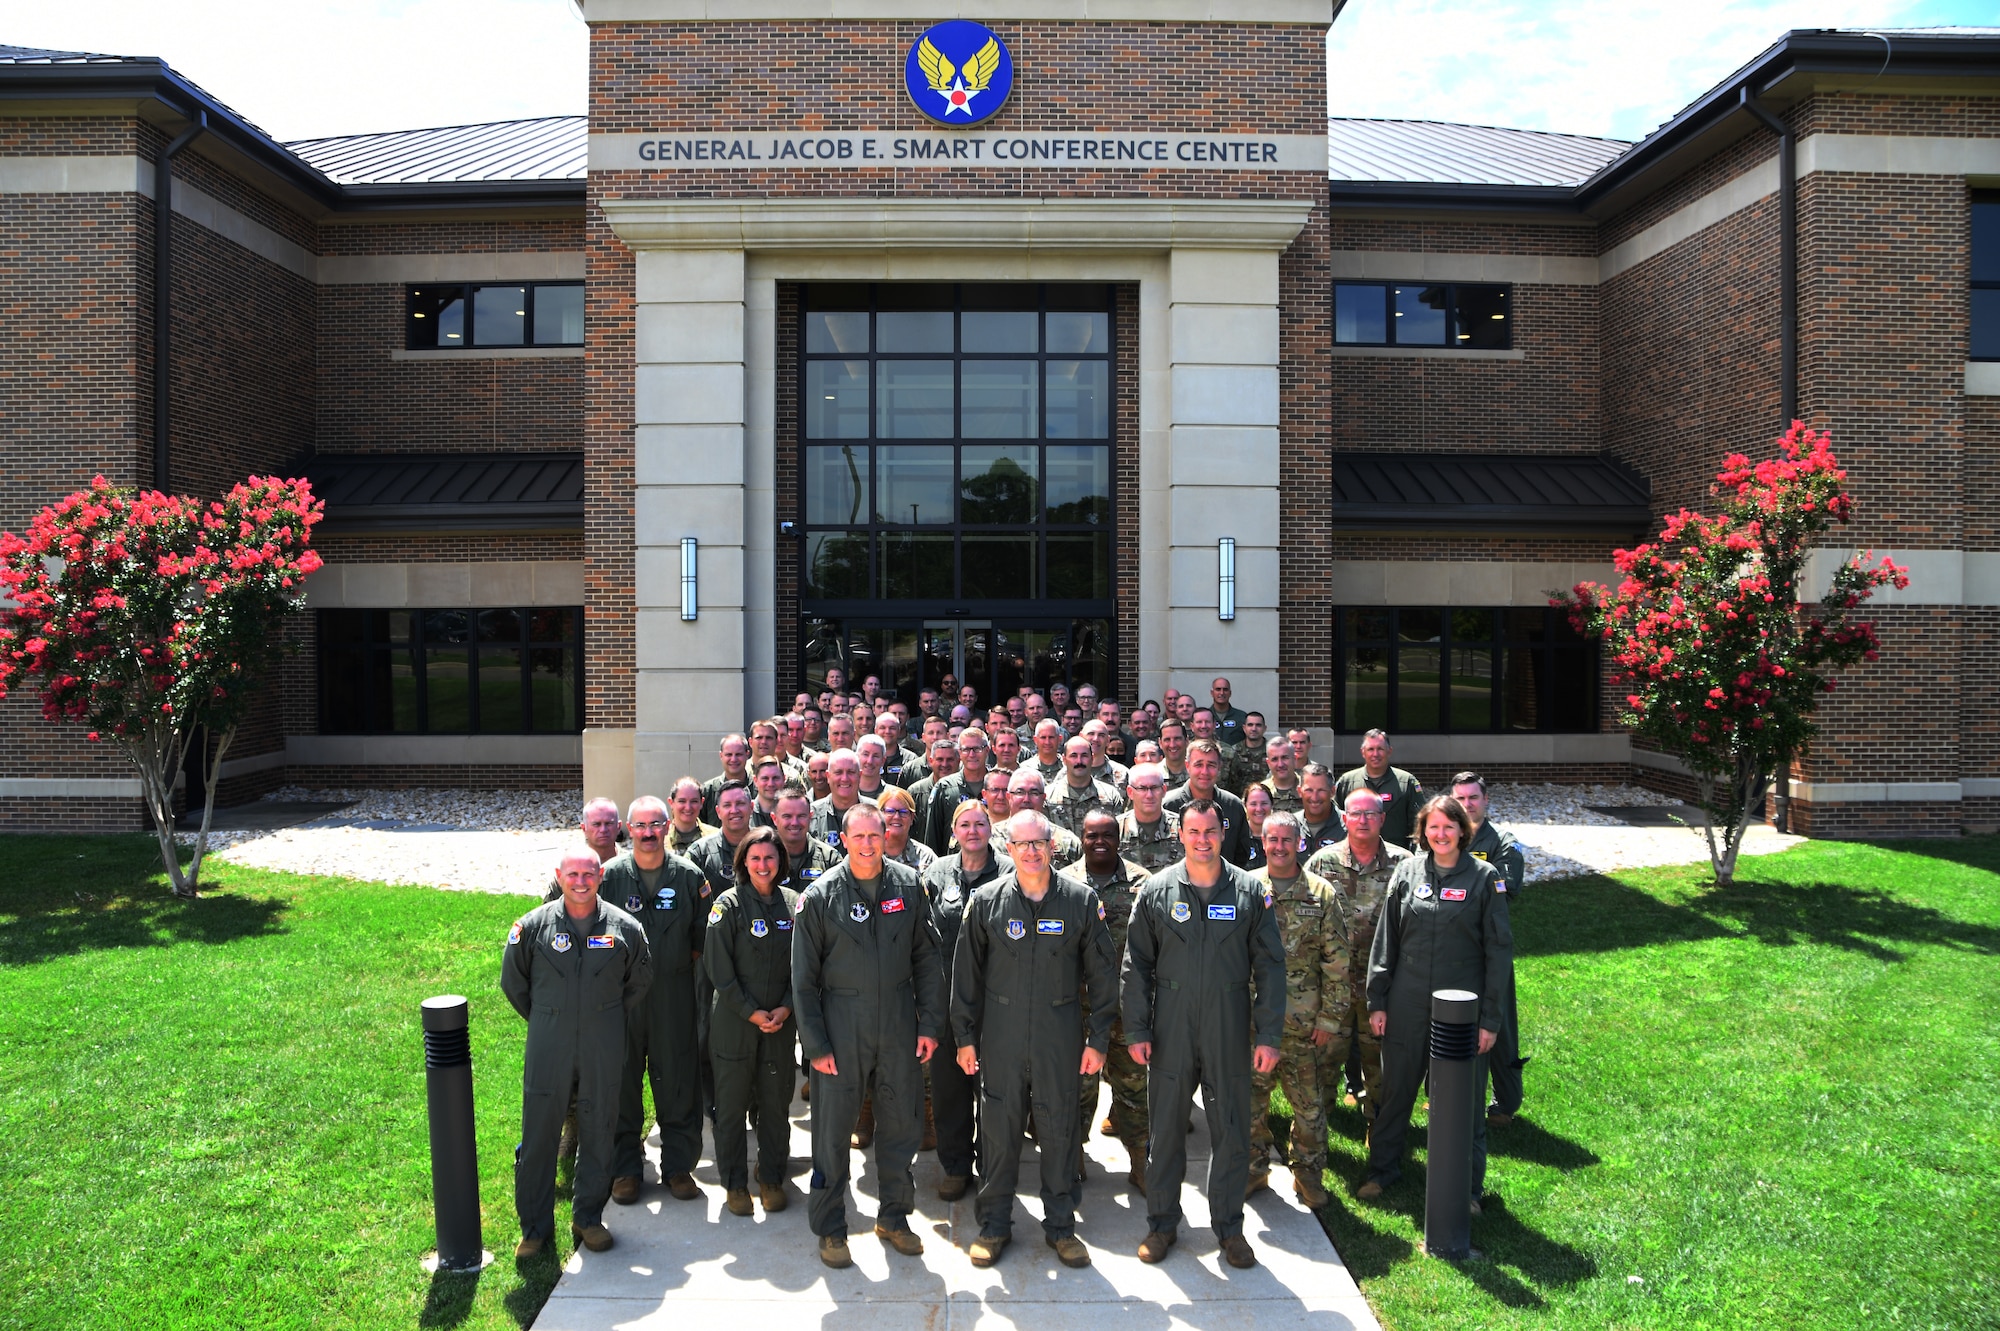 Air Force Senior leaders from the KC-135 Stratotanker community pose for a photo outside of the Gen. Jacob E. Smart Conference Center where they attended the first ever Total Force KC-135 Weapons System Council, Aug. 11, 2022. (U.S. Air Force Photo by Maj. Tim Smith)